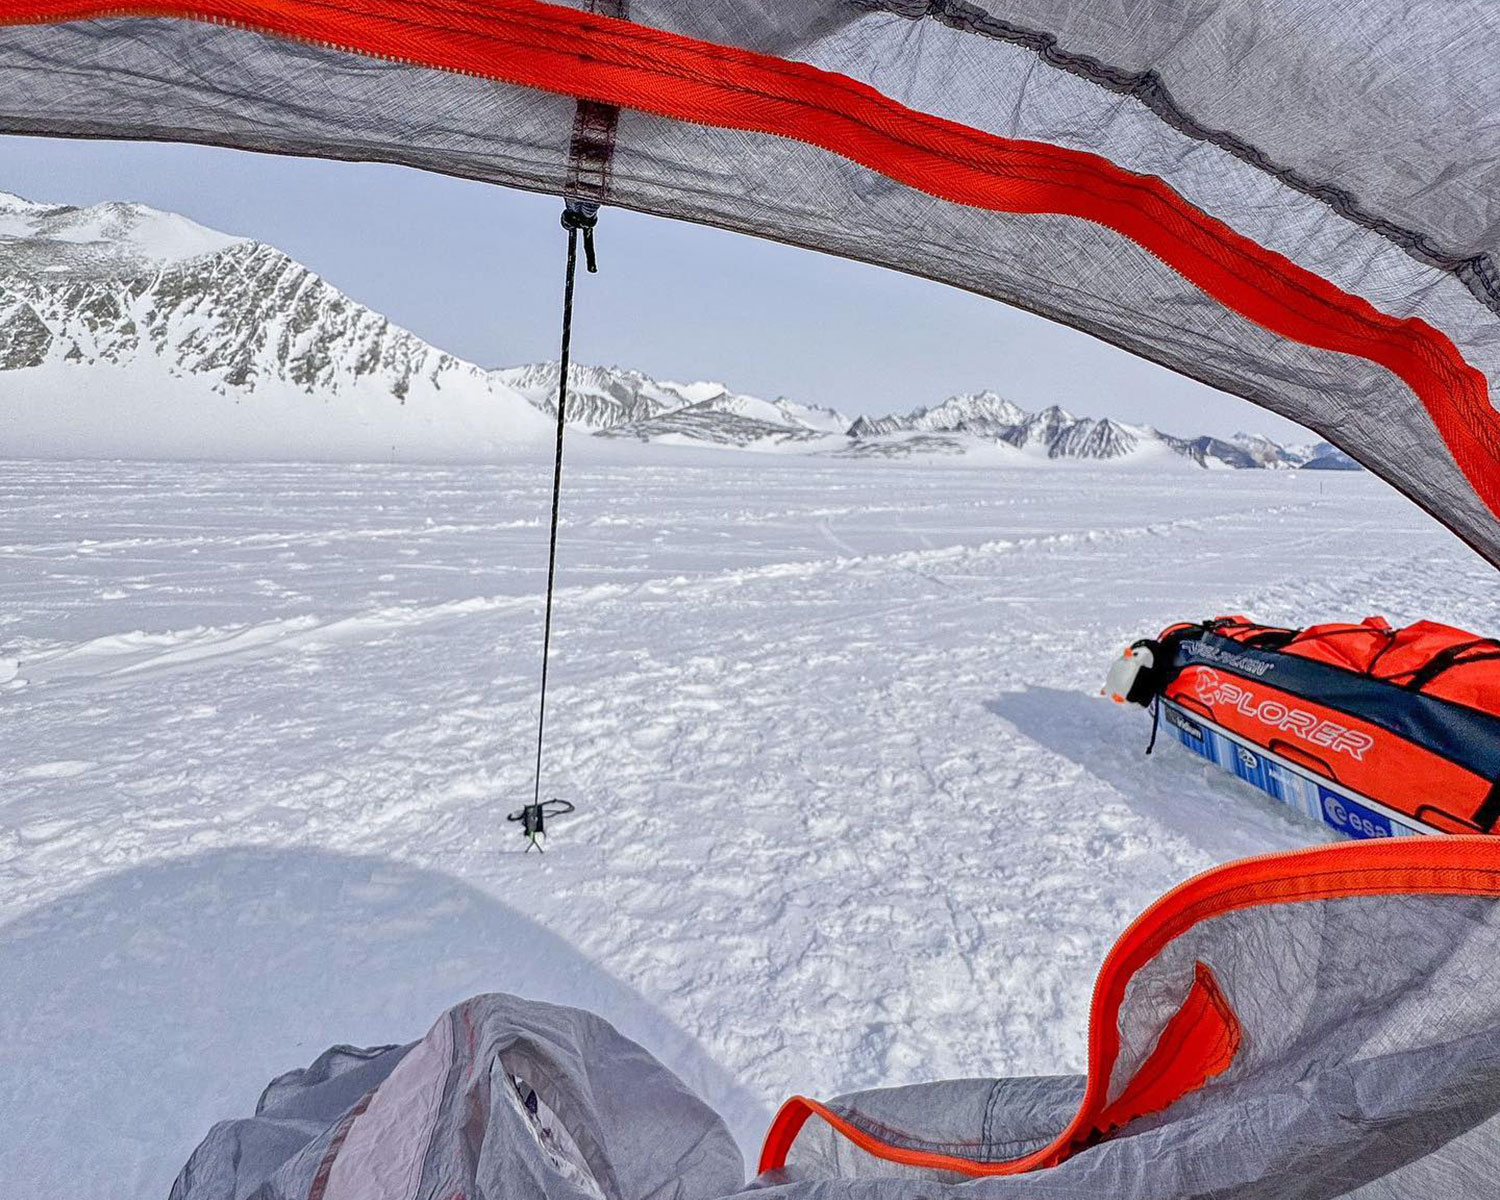 Omar di Felice Antarctica Unlimited solo crossing by fat bike, view from inside the tent on a clear day